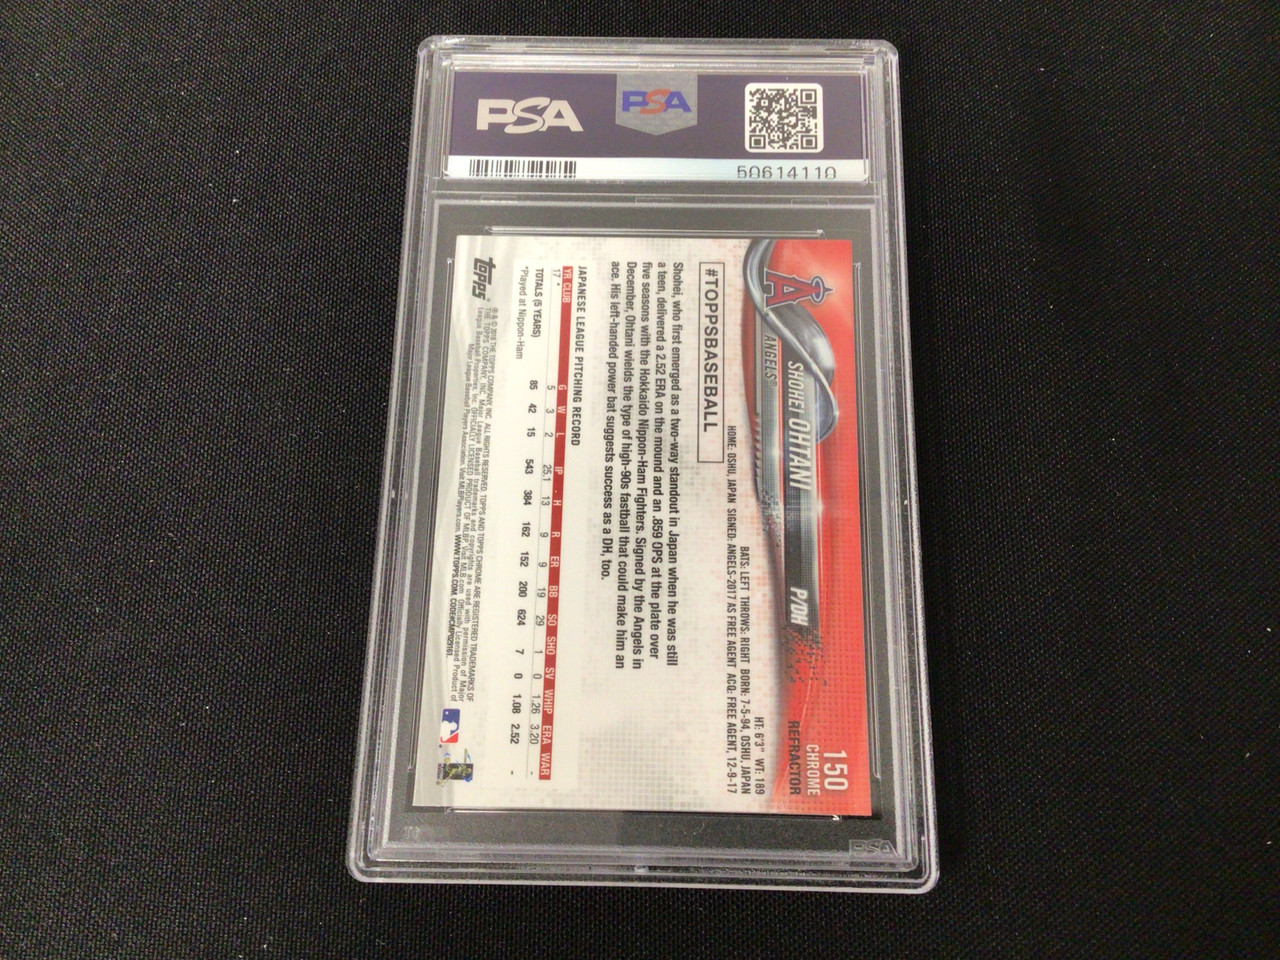 Sold at Auction: 2018 Topps Chrome Shohei Ohtani Pink Psa 10 Rookie #150